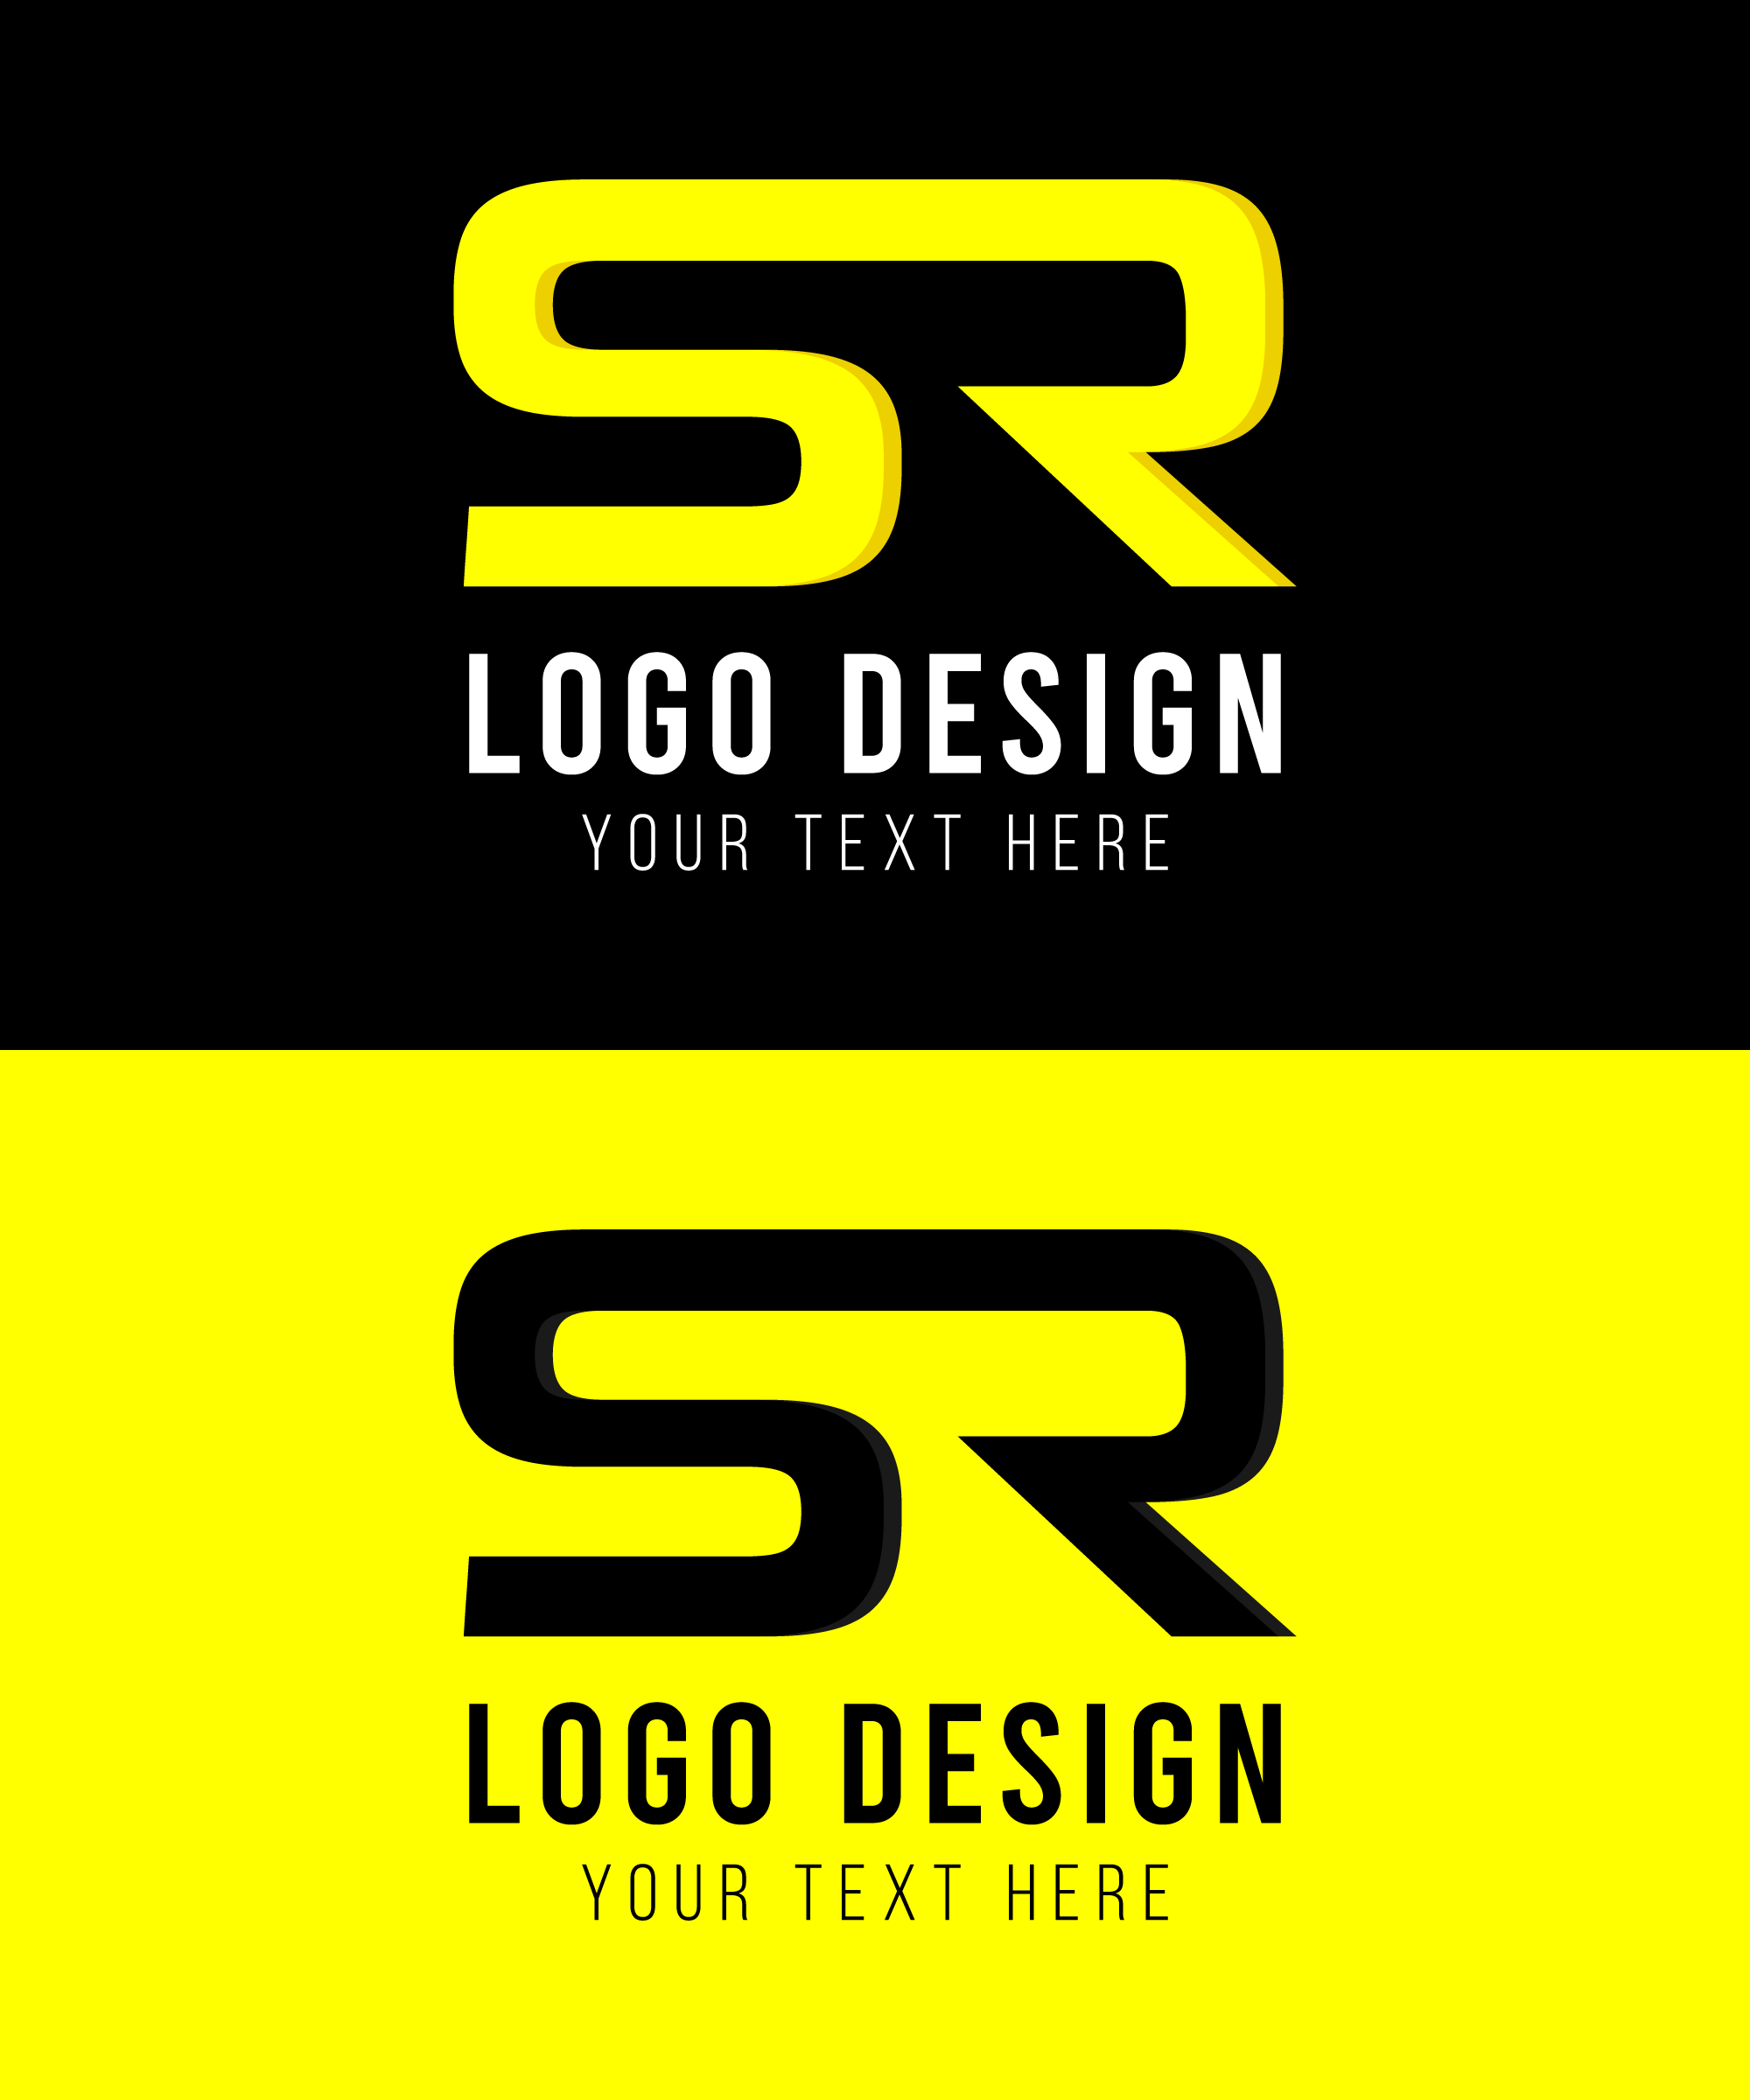 Sr Logo Vector Art, Icons, and Graphics for Free Download